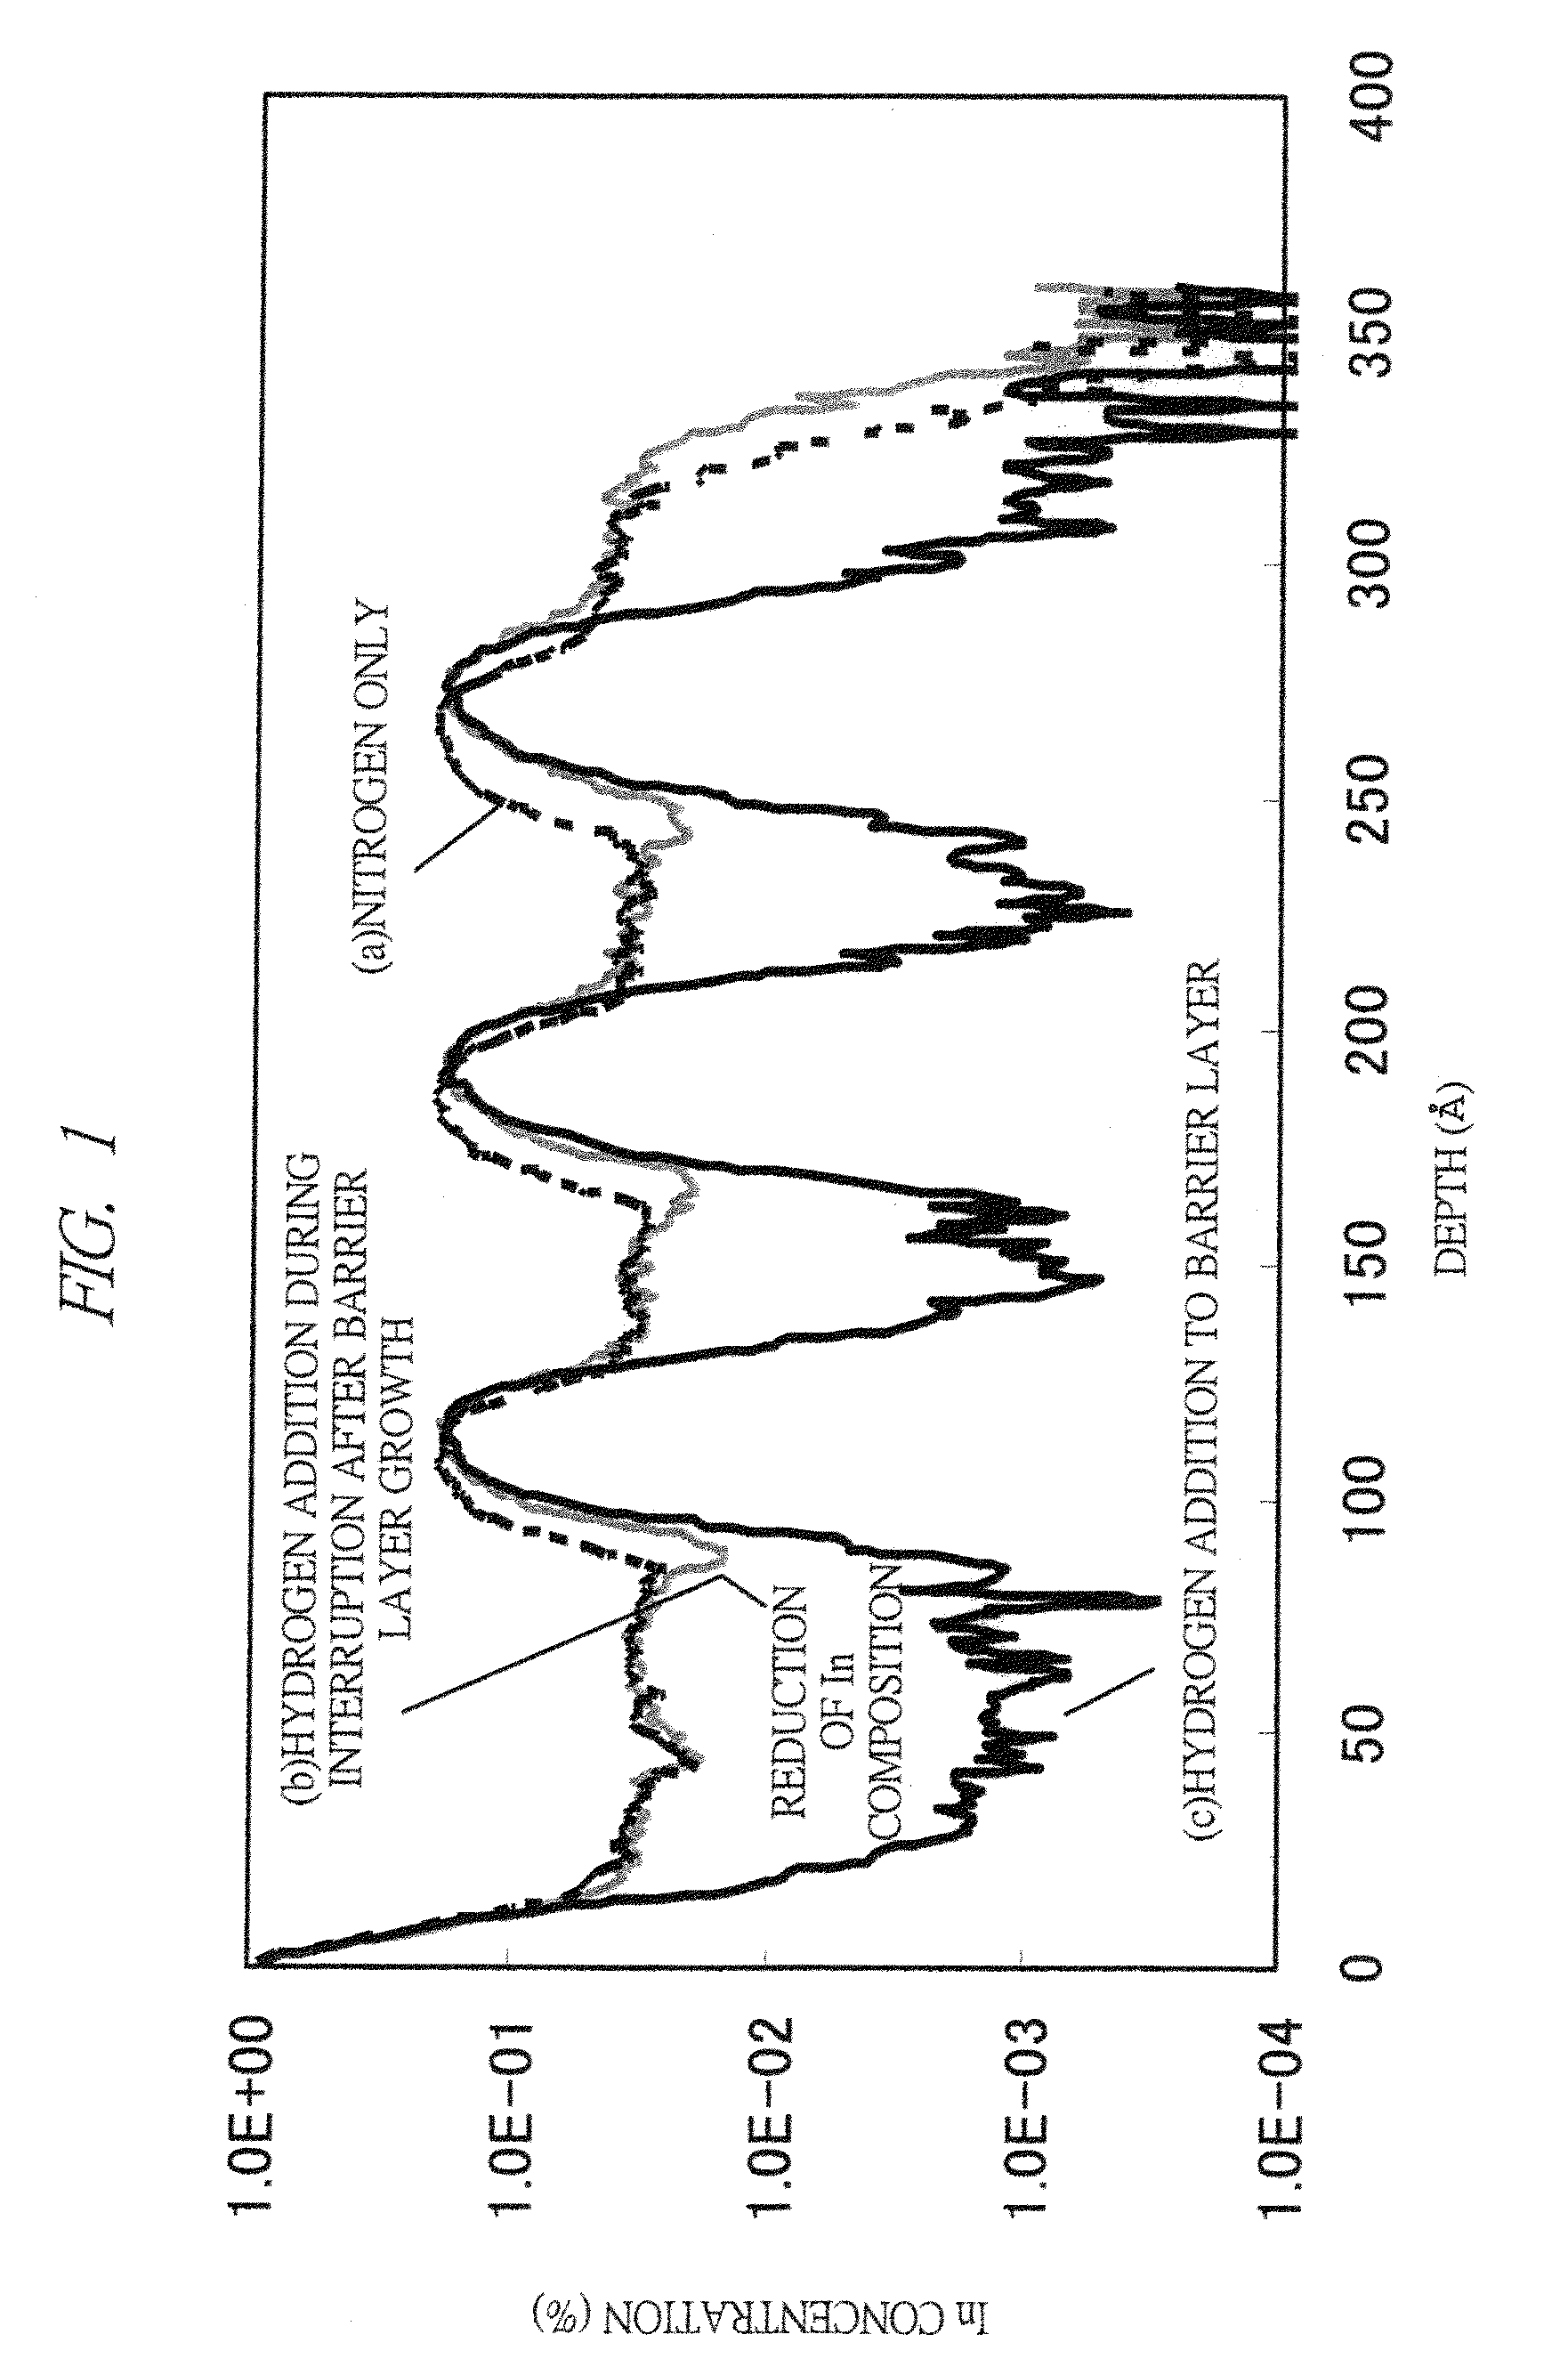 Nitride semiconductor optical element and manufacturing method thereof